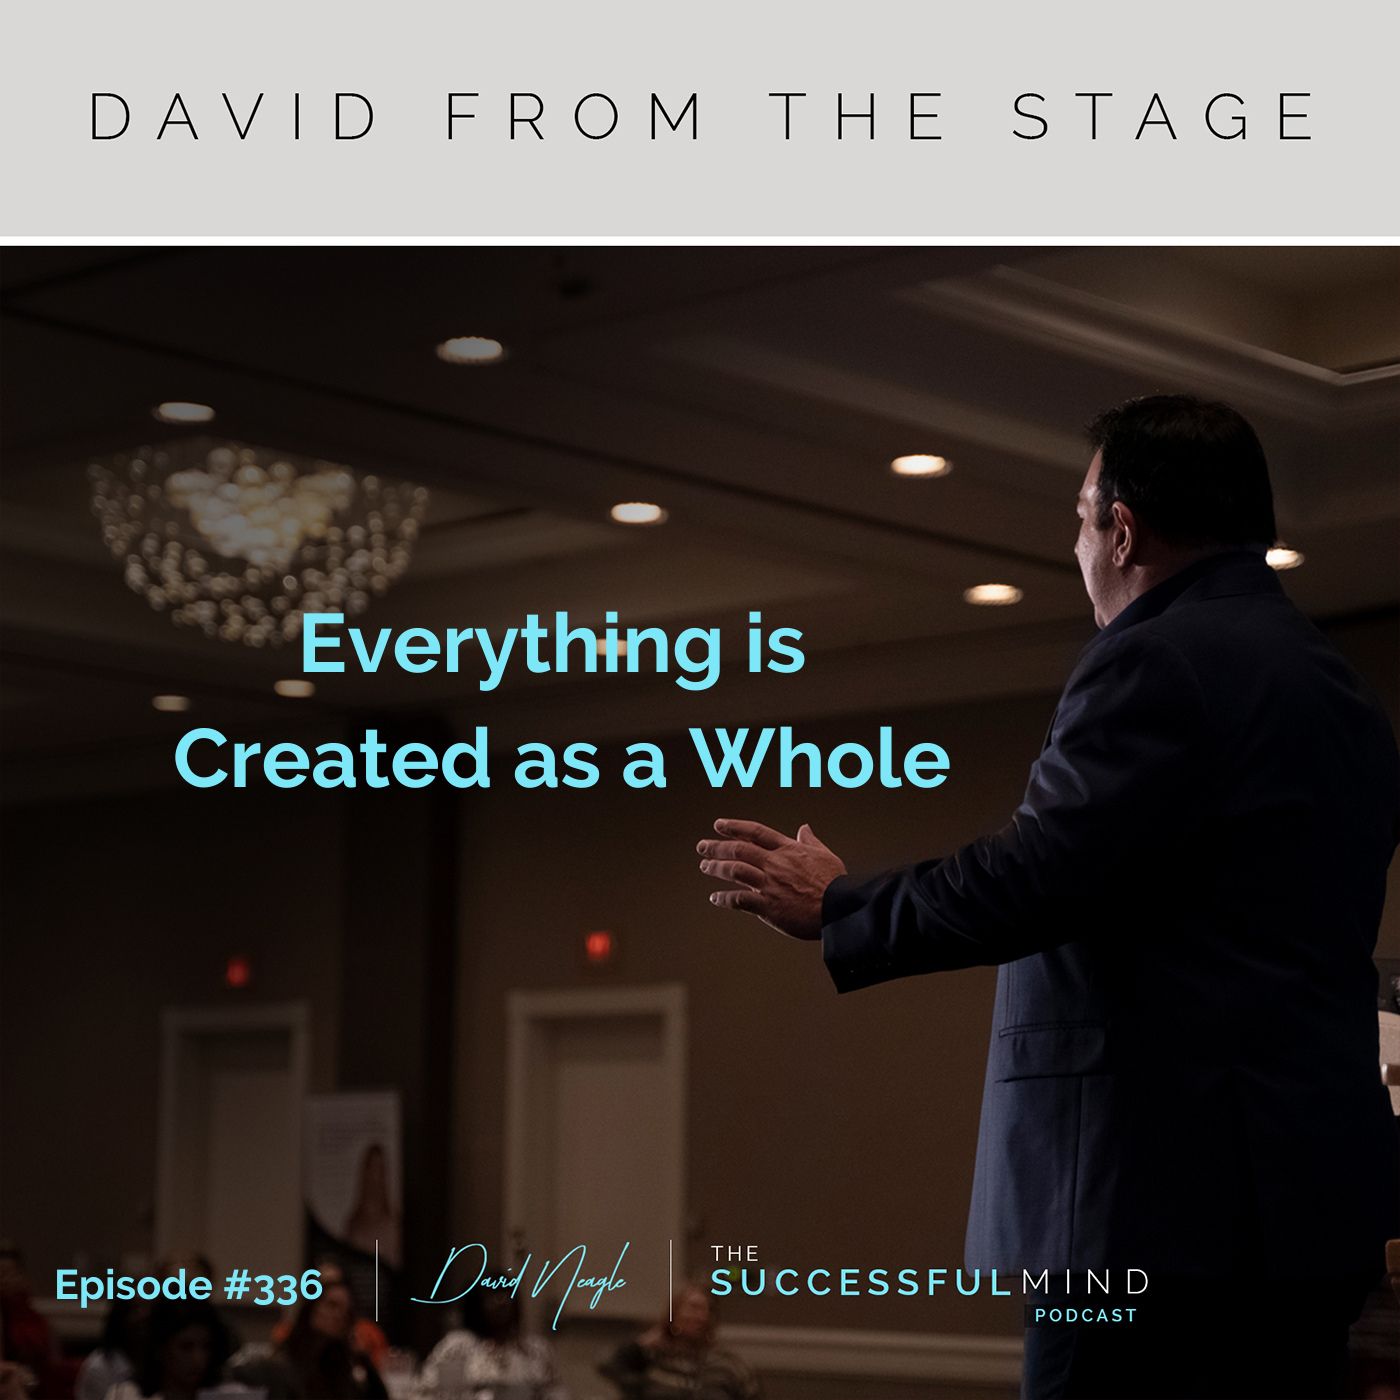 The Successful Mind Podcast - Episode 336 - Everything is Created as a Whole